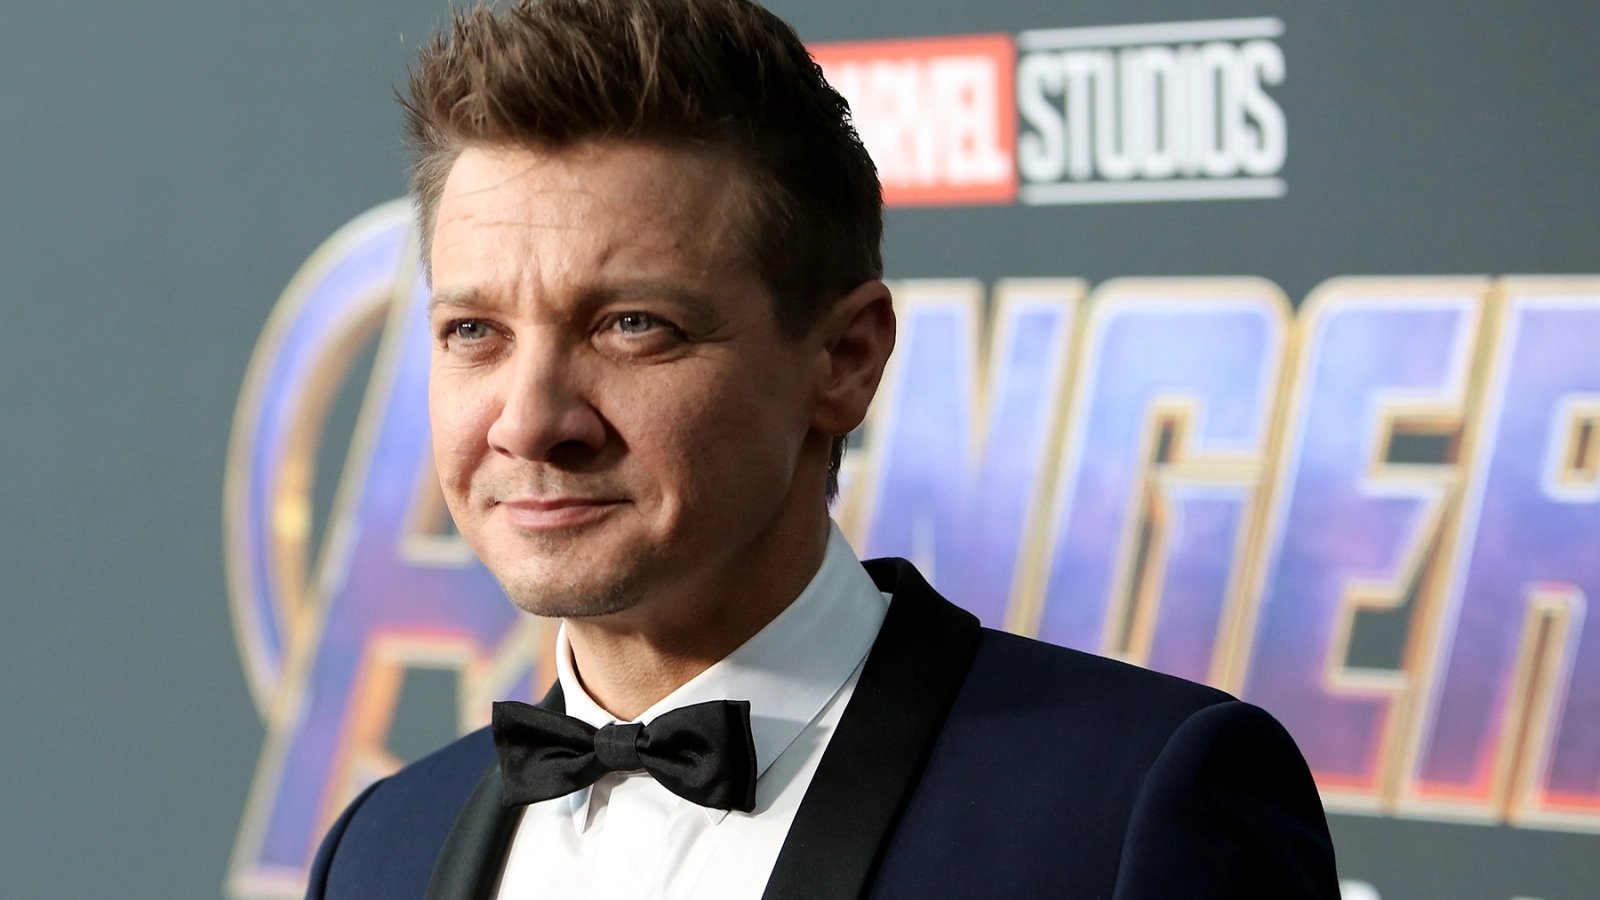 Jeremy Renner, his doctor: "The snow plow came within millimeters of vital organs"